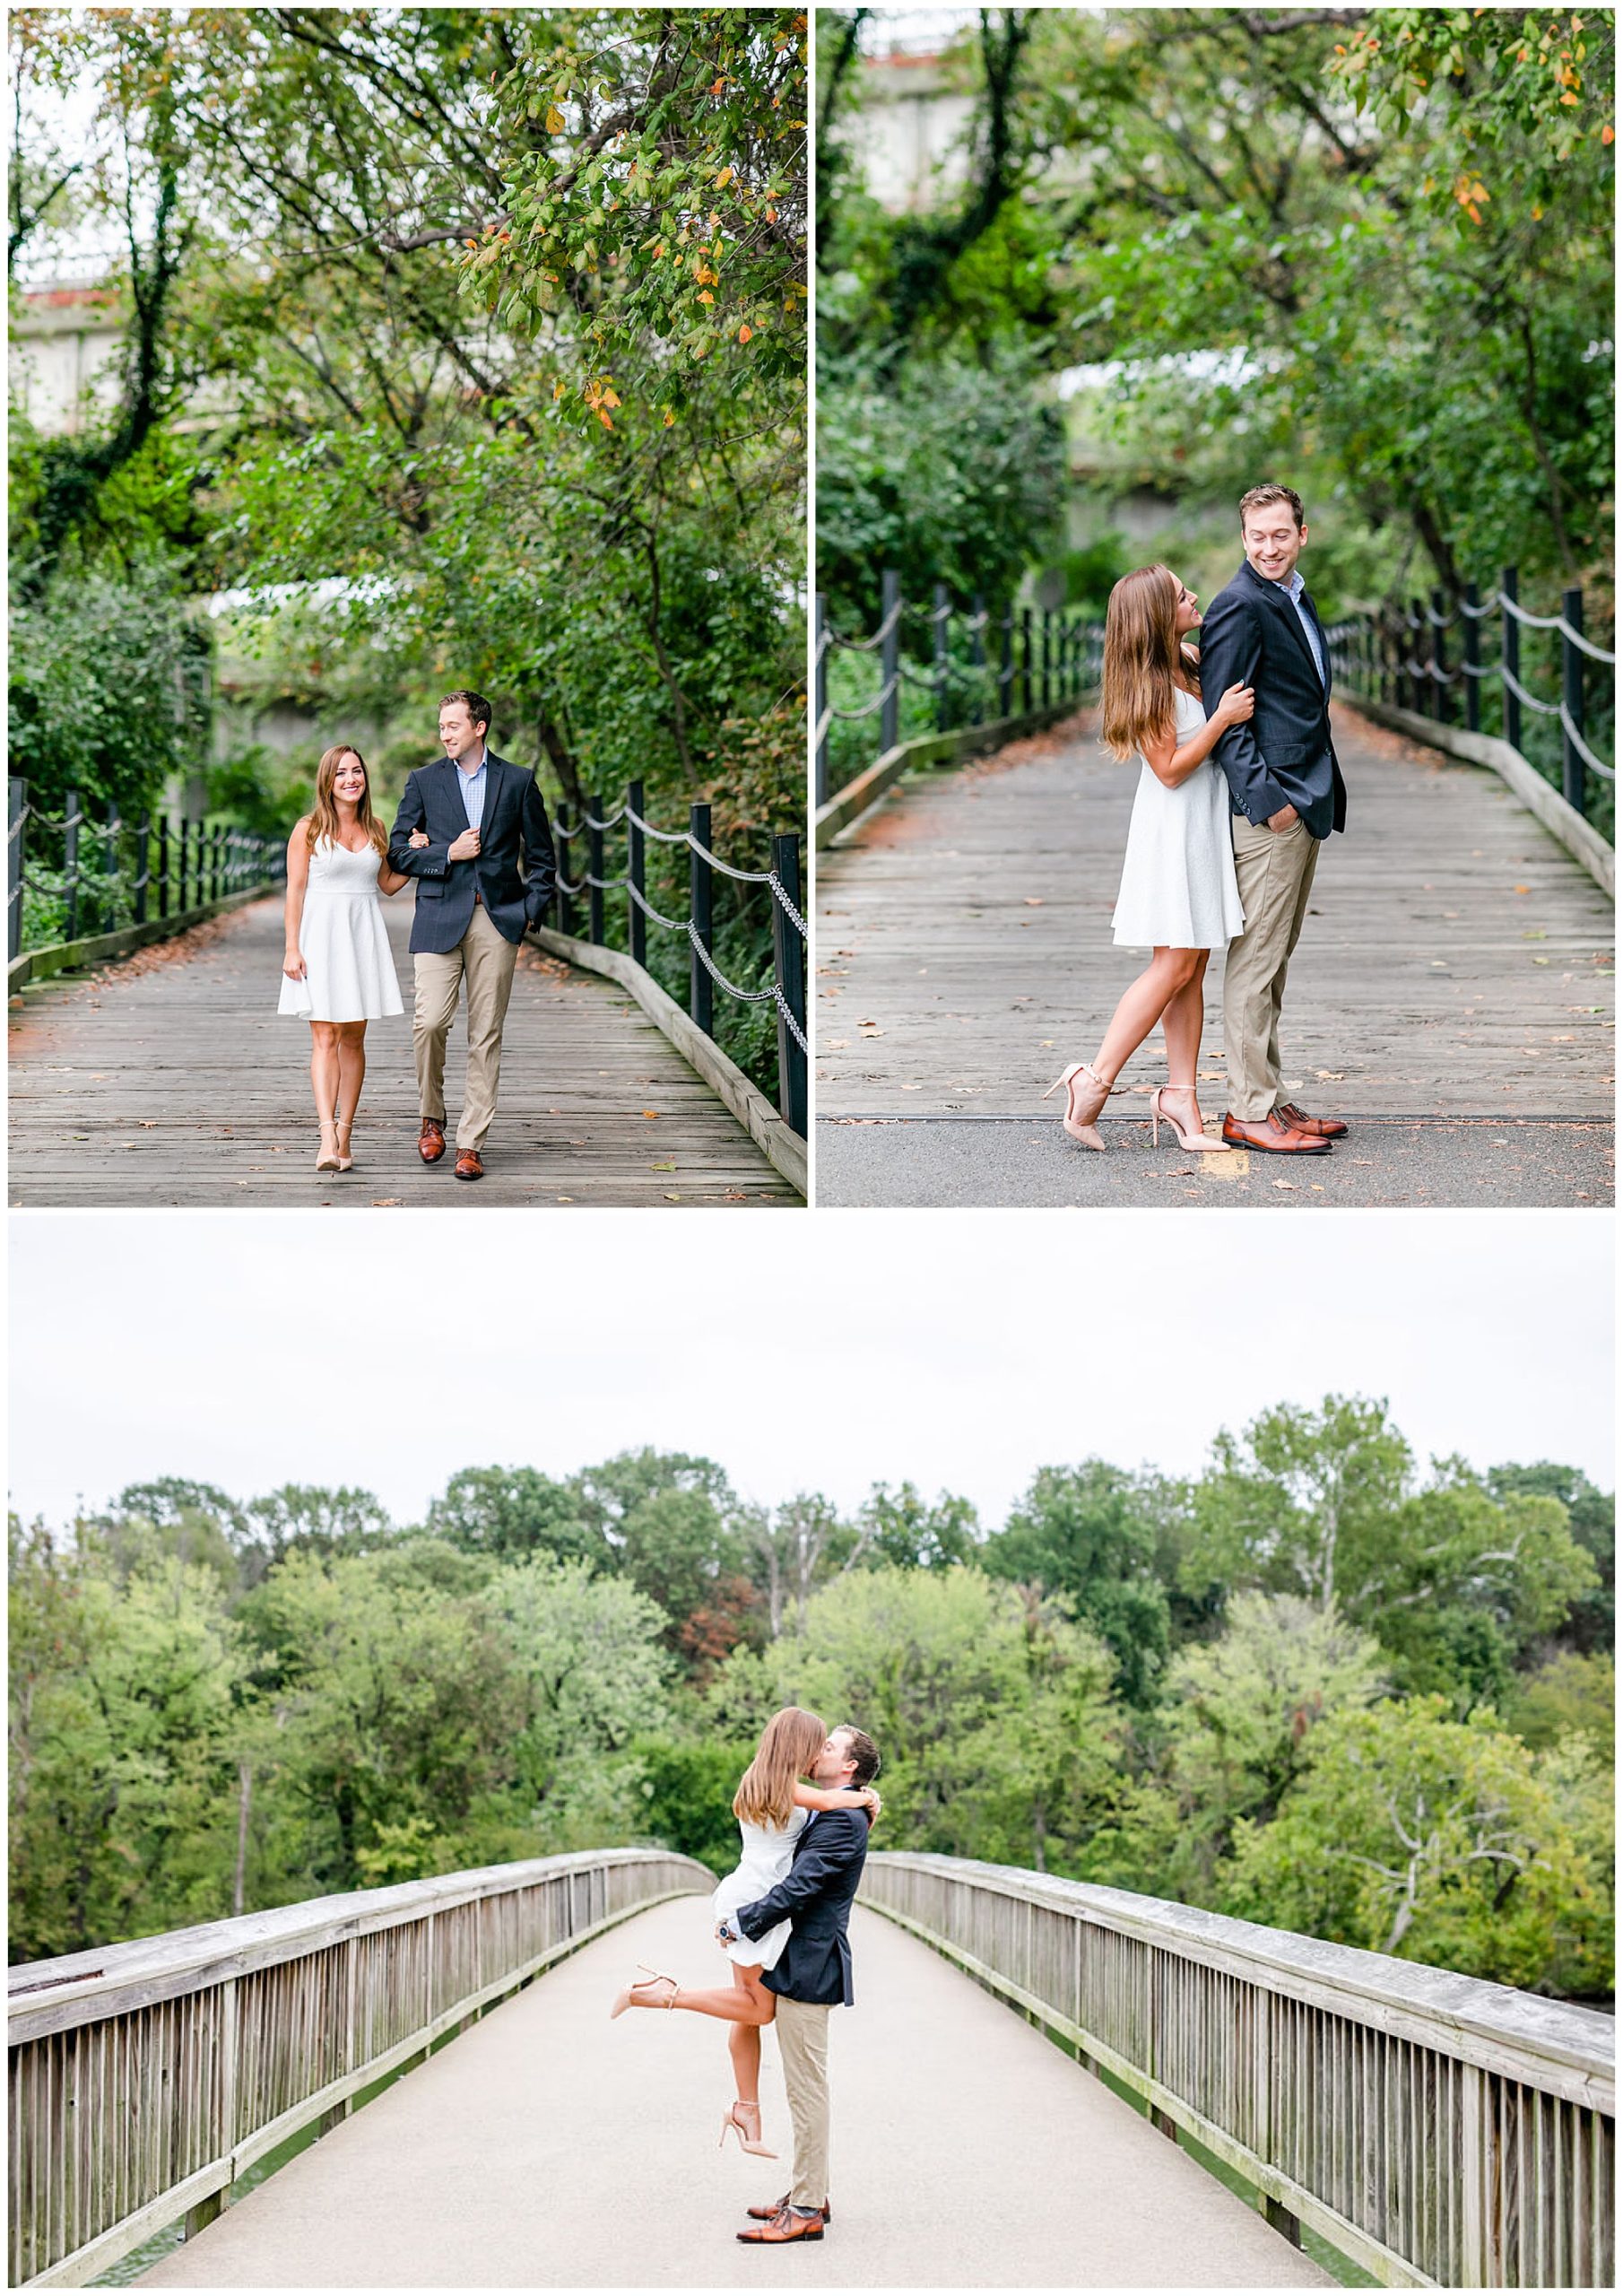 GW Parkway engagement photos, Roosevelt Island engagement photos, Mt. Vernon Trail engagement photos, Arlington engagement photos, DC engagement photos, waterfront engagement photos, autumn engagement photos, natural light engagement photos, Rachel E.H. Photography, man and woman kissing on bridge